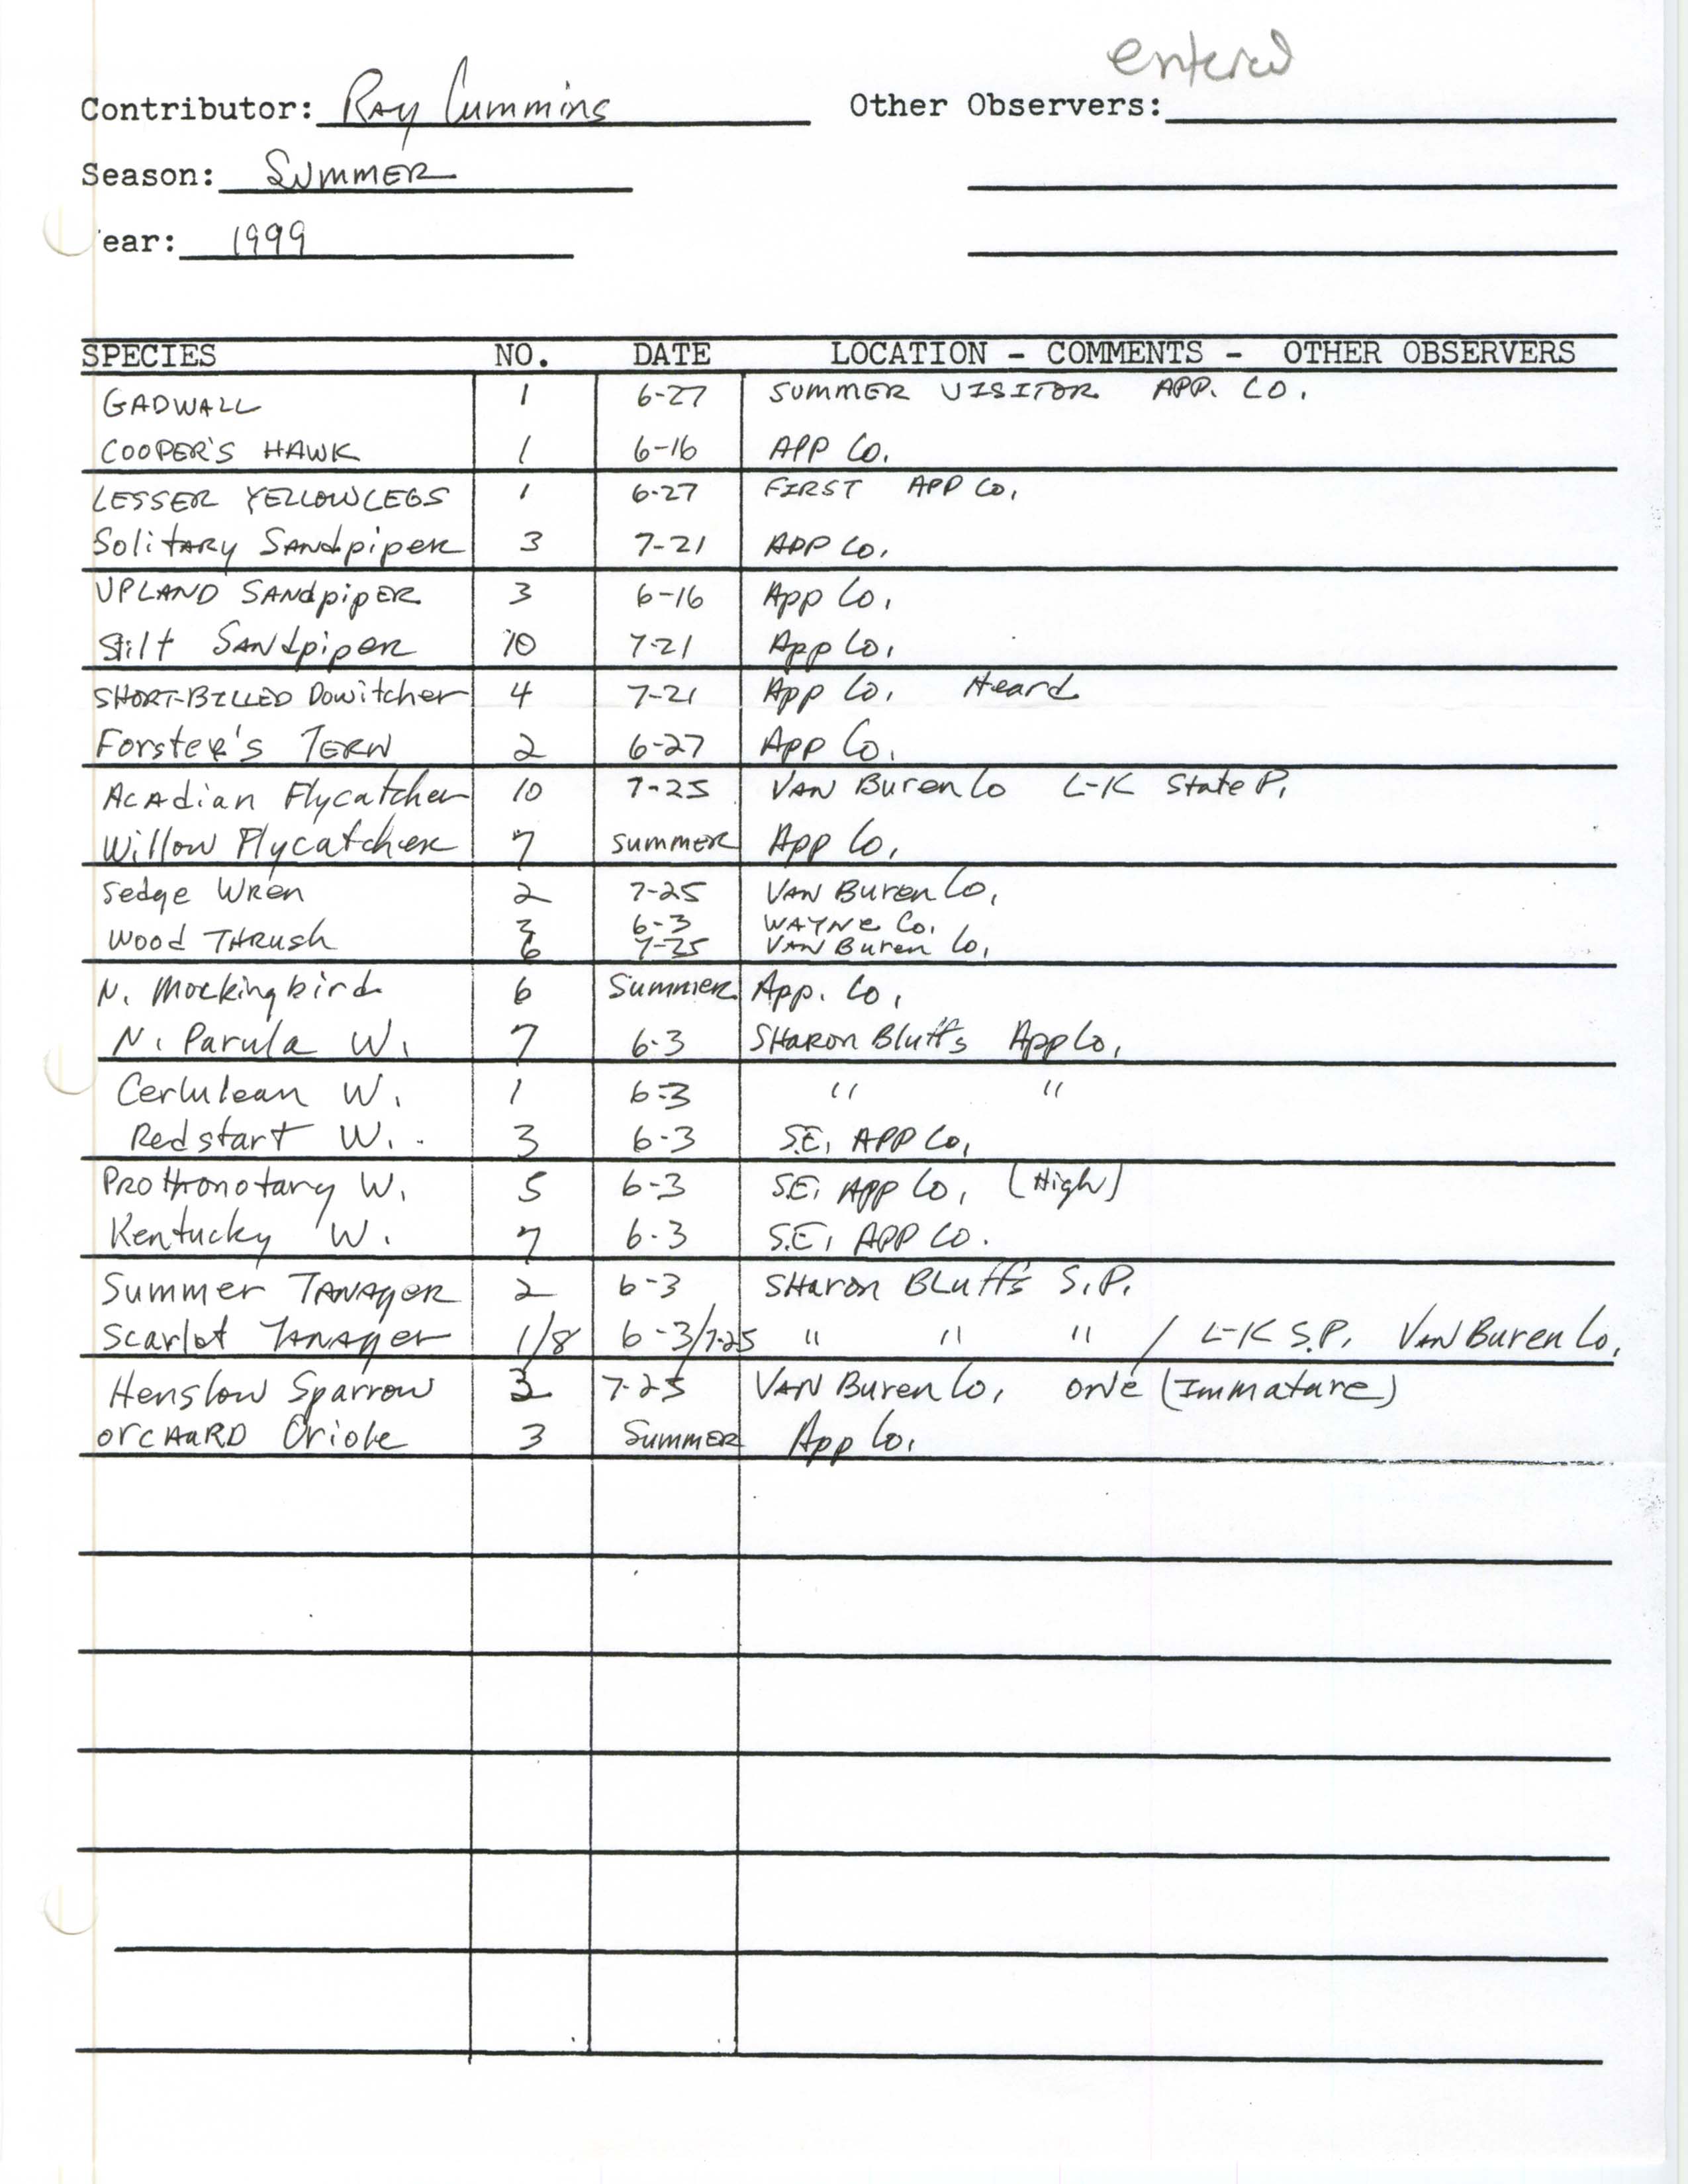 Annotated bird sighting list for summer 1999 compiled by Ray Cummins